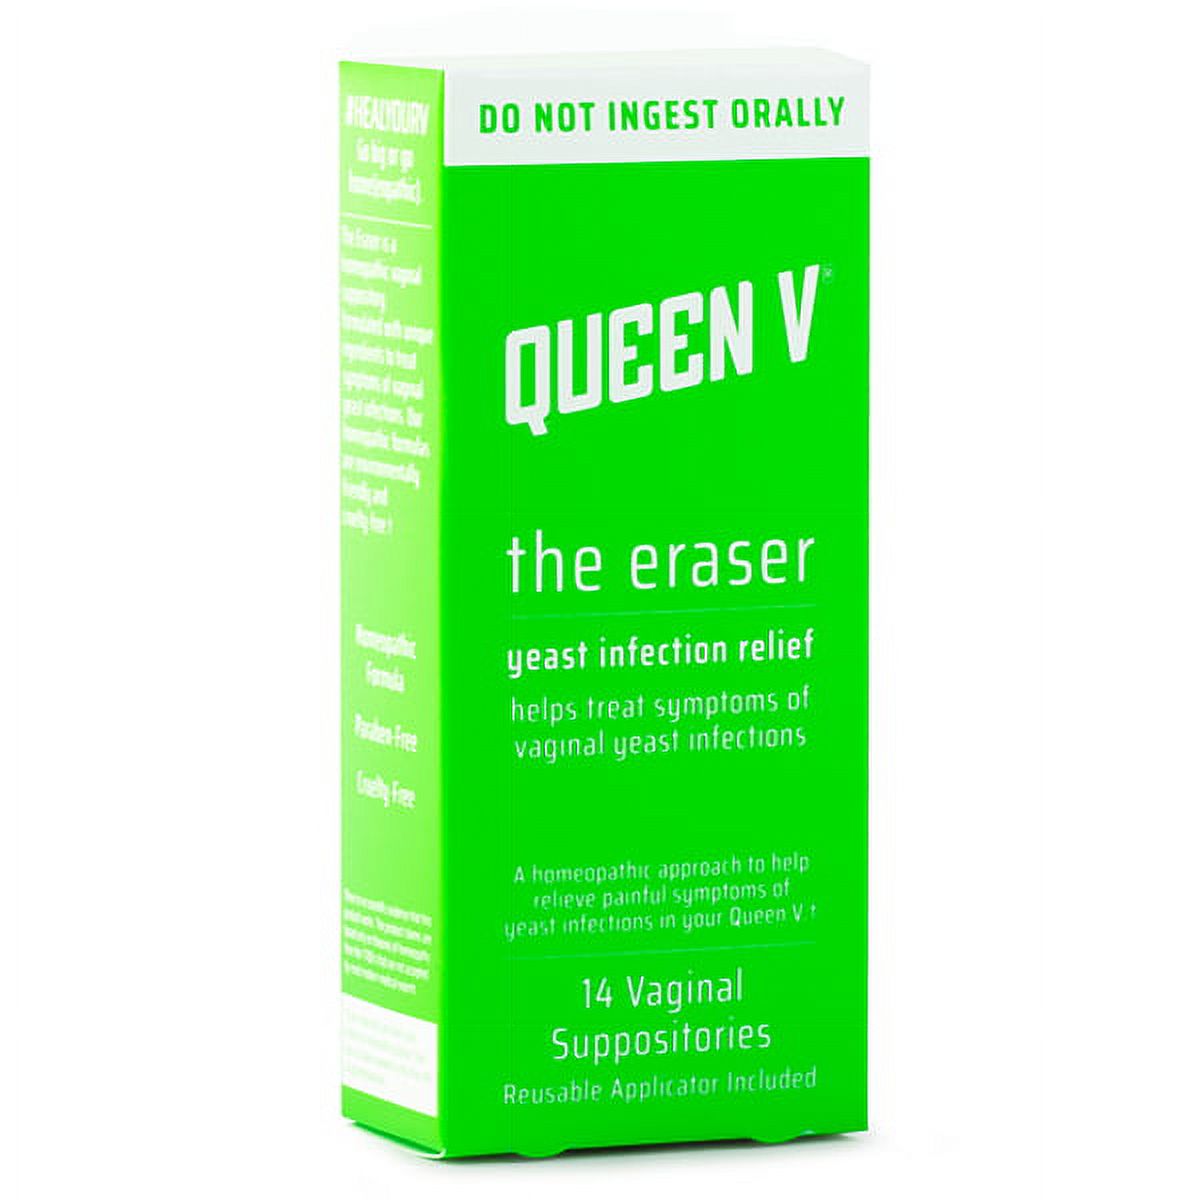 Queen V The Eraser, Natural Alternative Yeast Infection Treatment, 14 Vaginal Suppositories - image 1 of 8